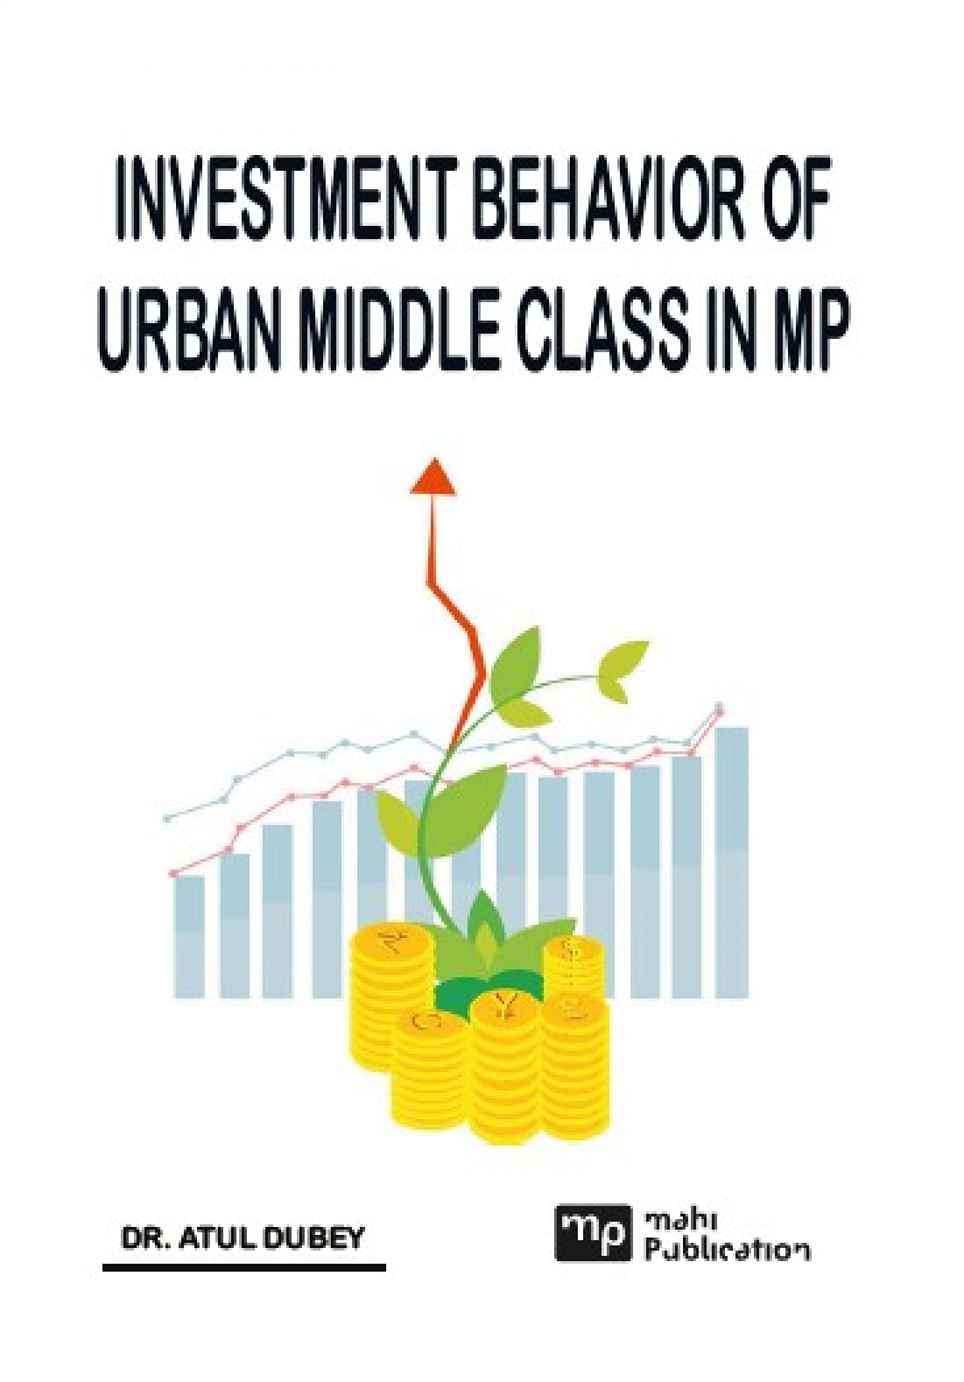  Investment Behavior of Urban Middle Class in MP